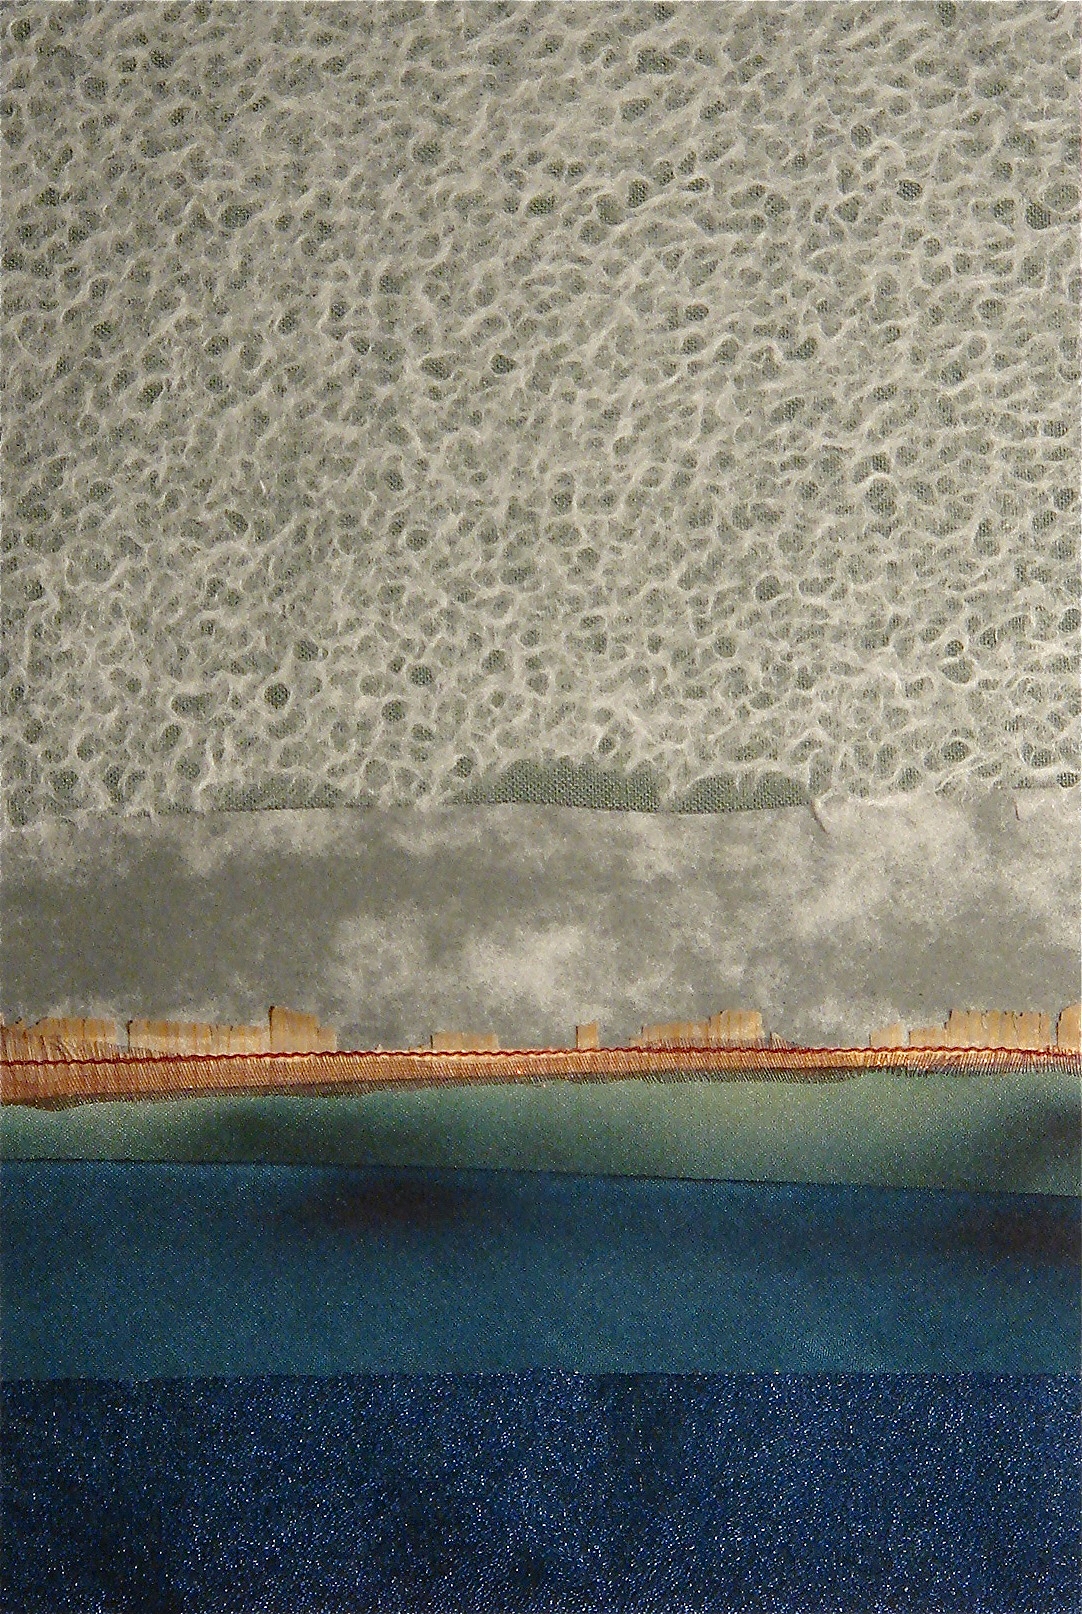   Landscapes Series    Night Storm   12” x 16”  Paper and Silks  2006 